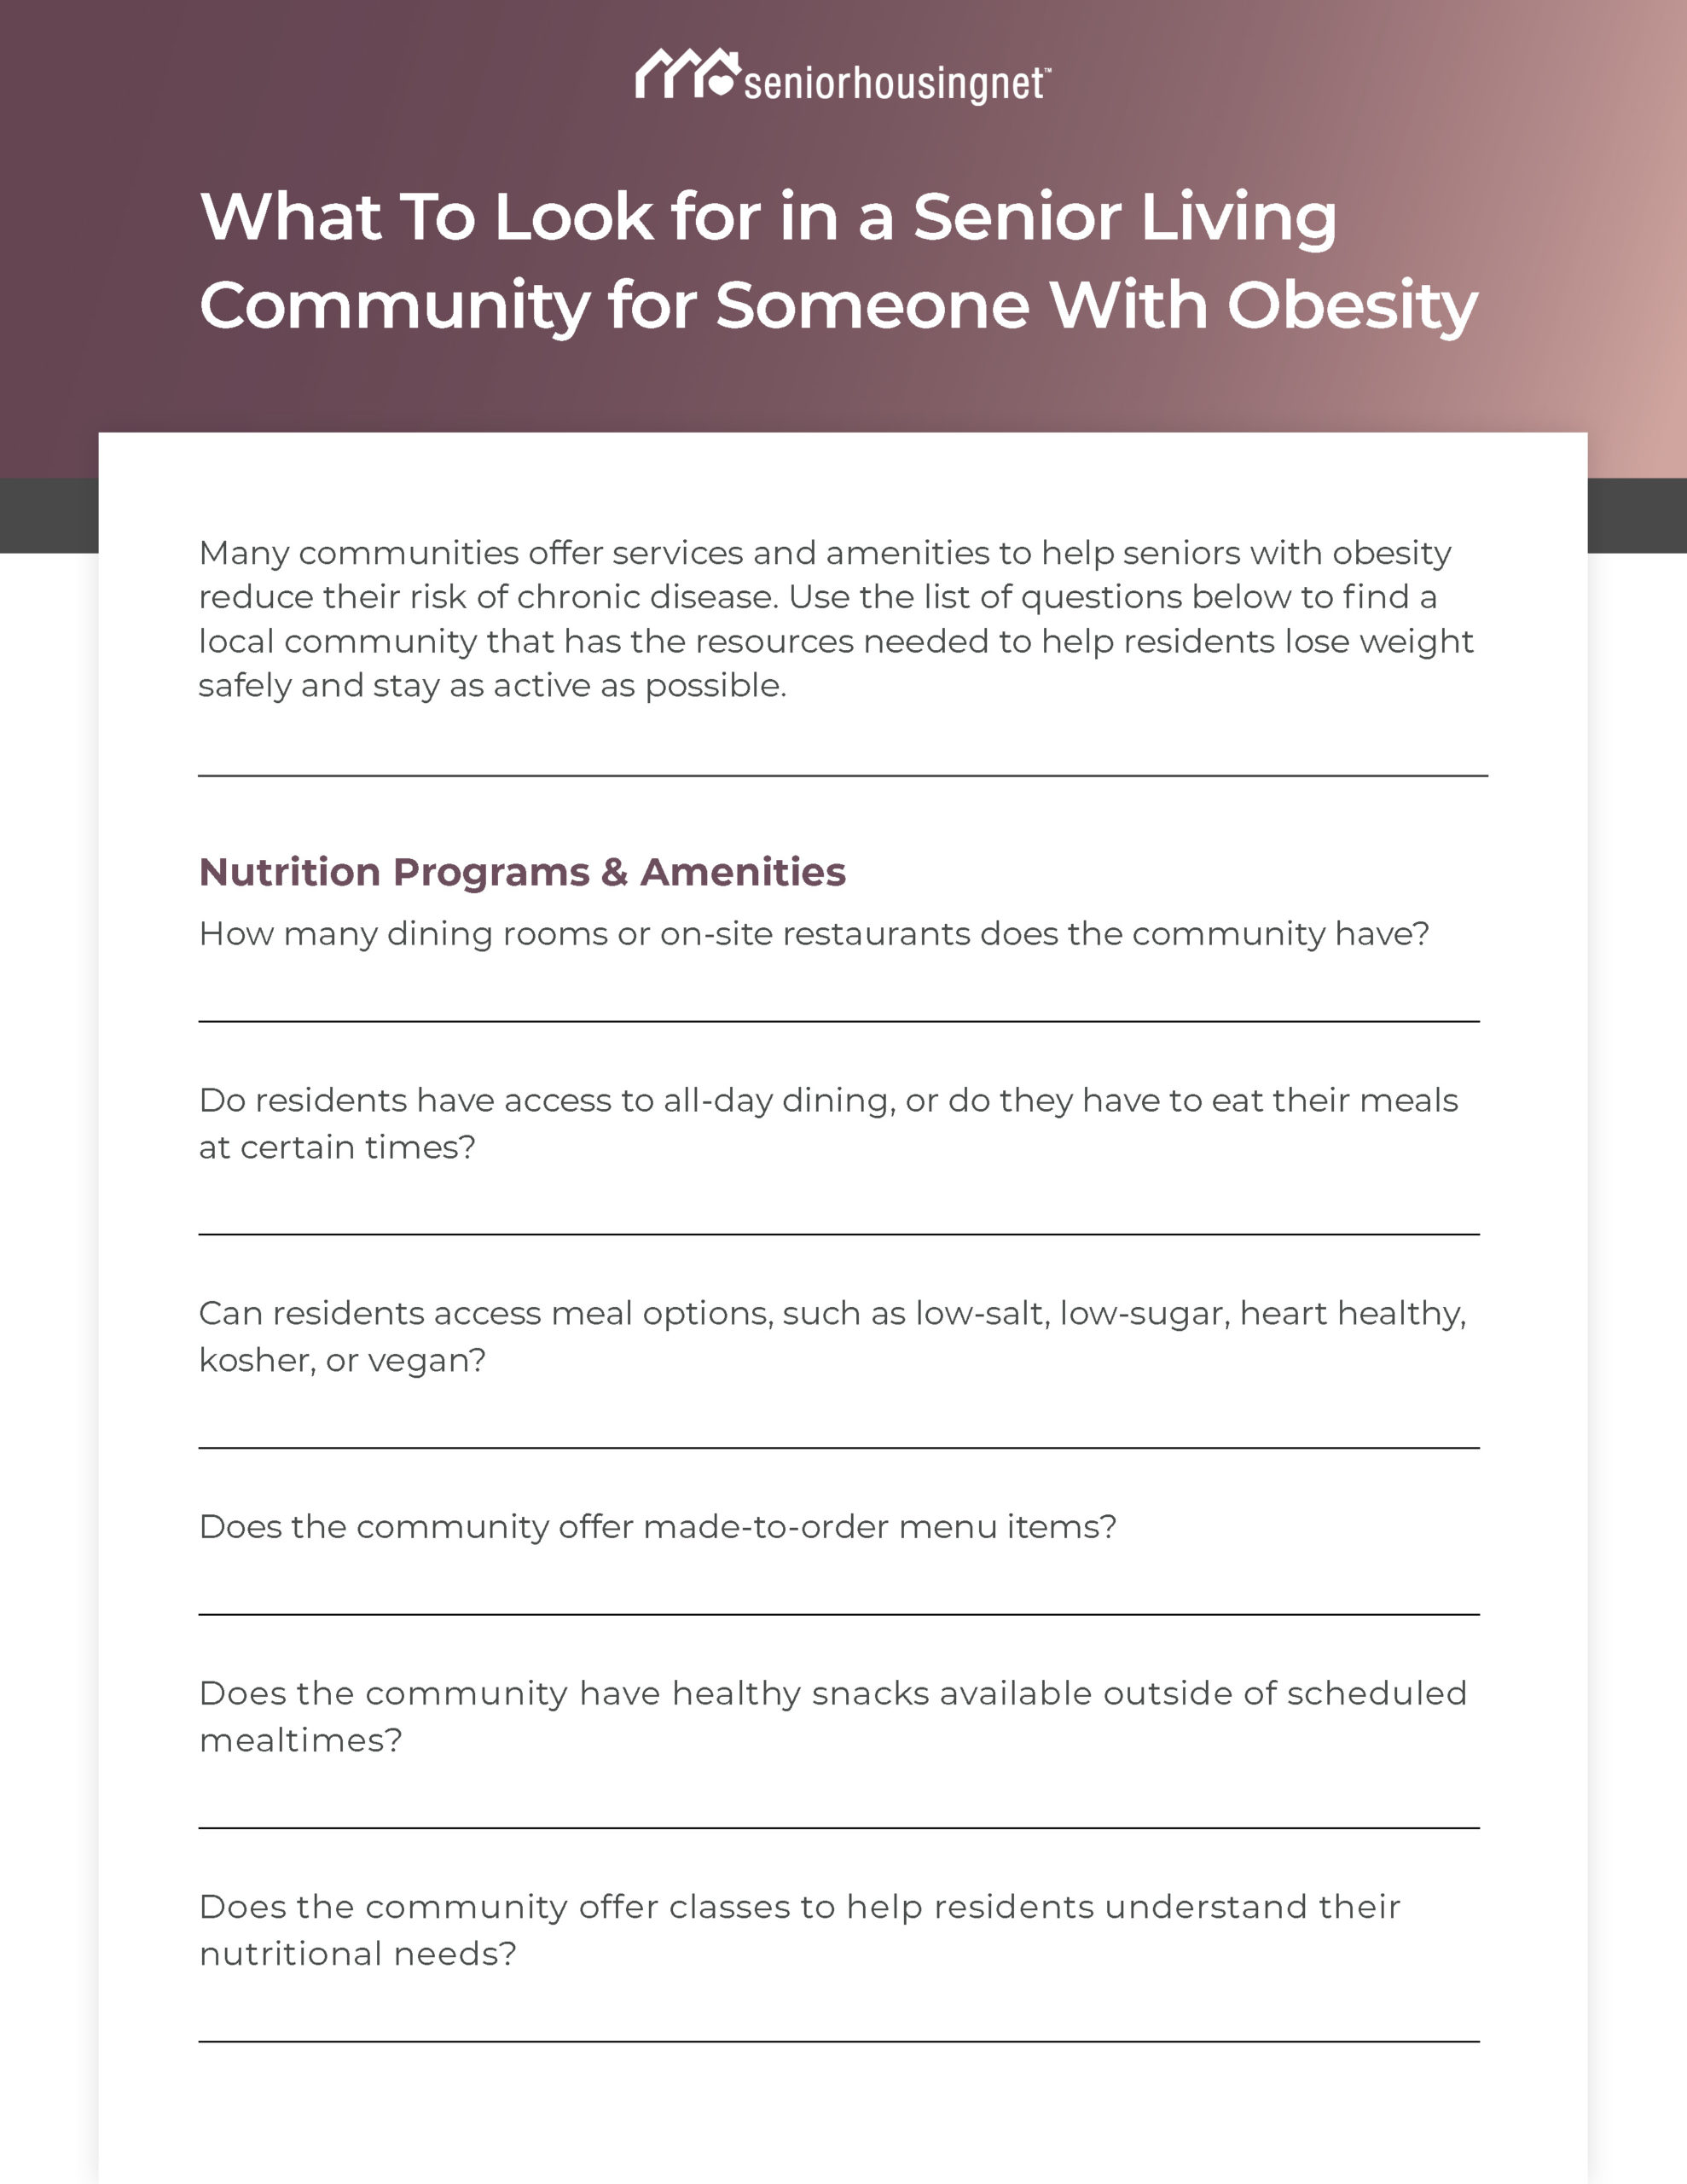 Finding the Right Senior Living Community for Seniors With Obesity